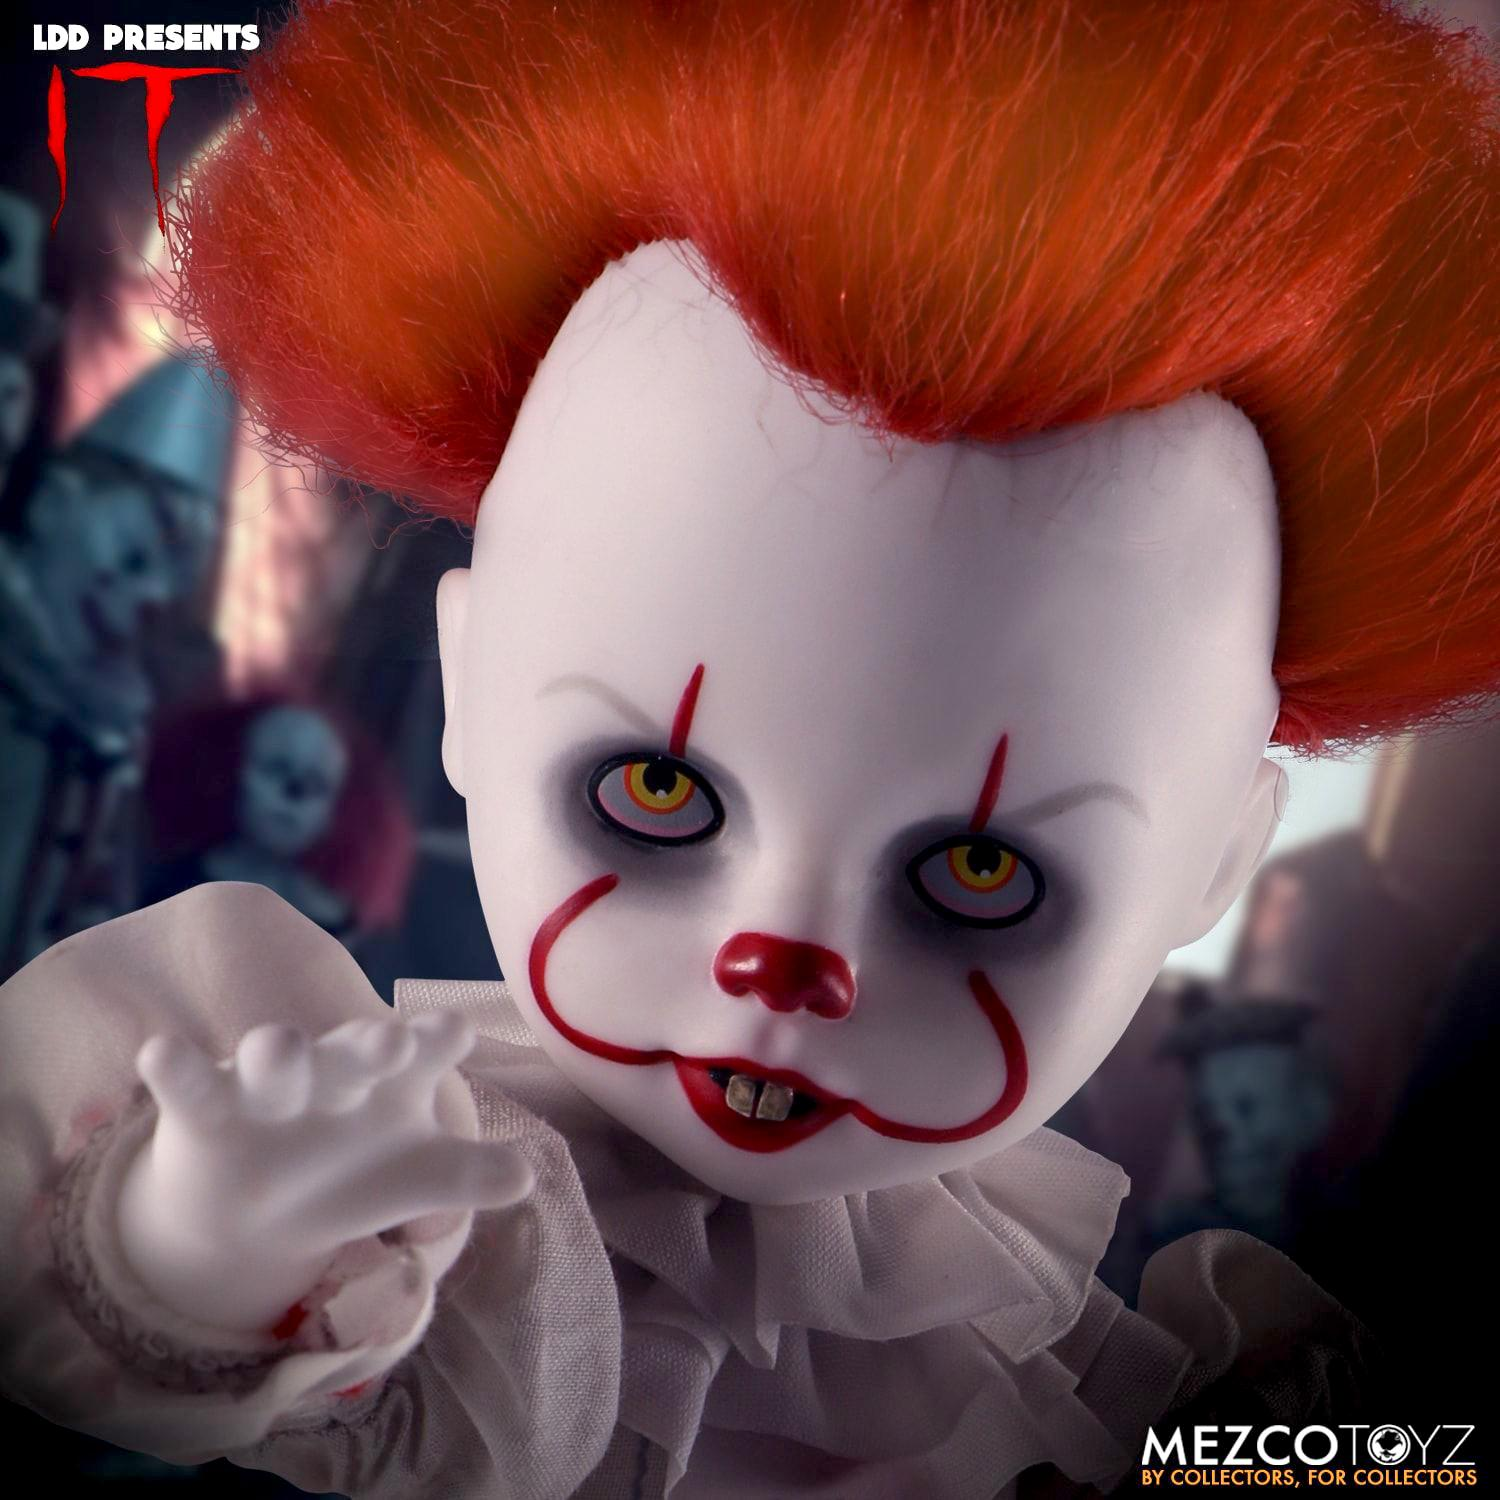 MEZCO IT TOYS / ES Puppe Puppe Living 2017: Pennywise Dead Dolls